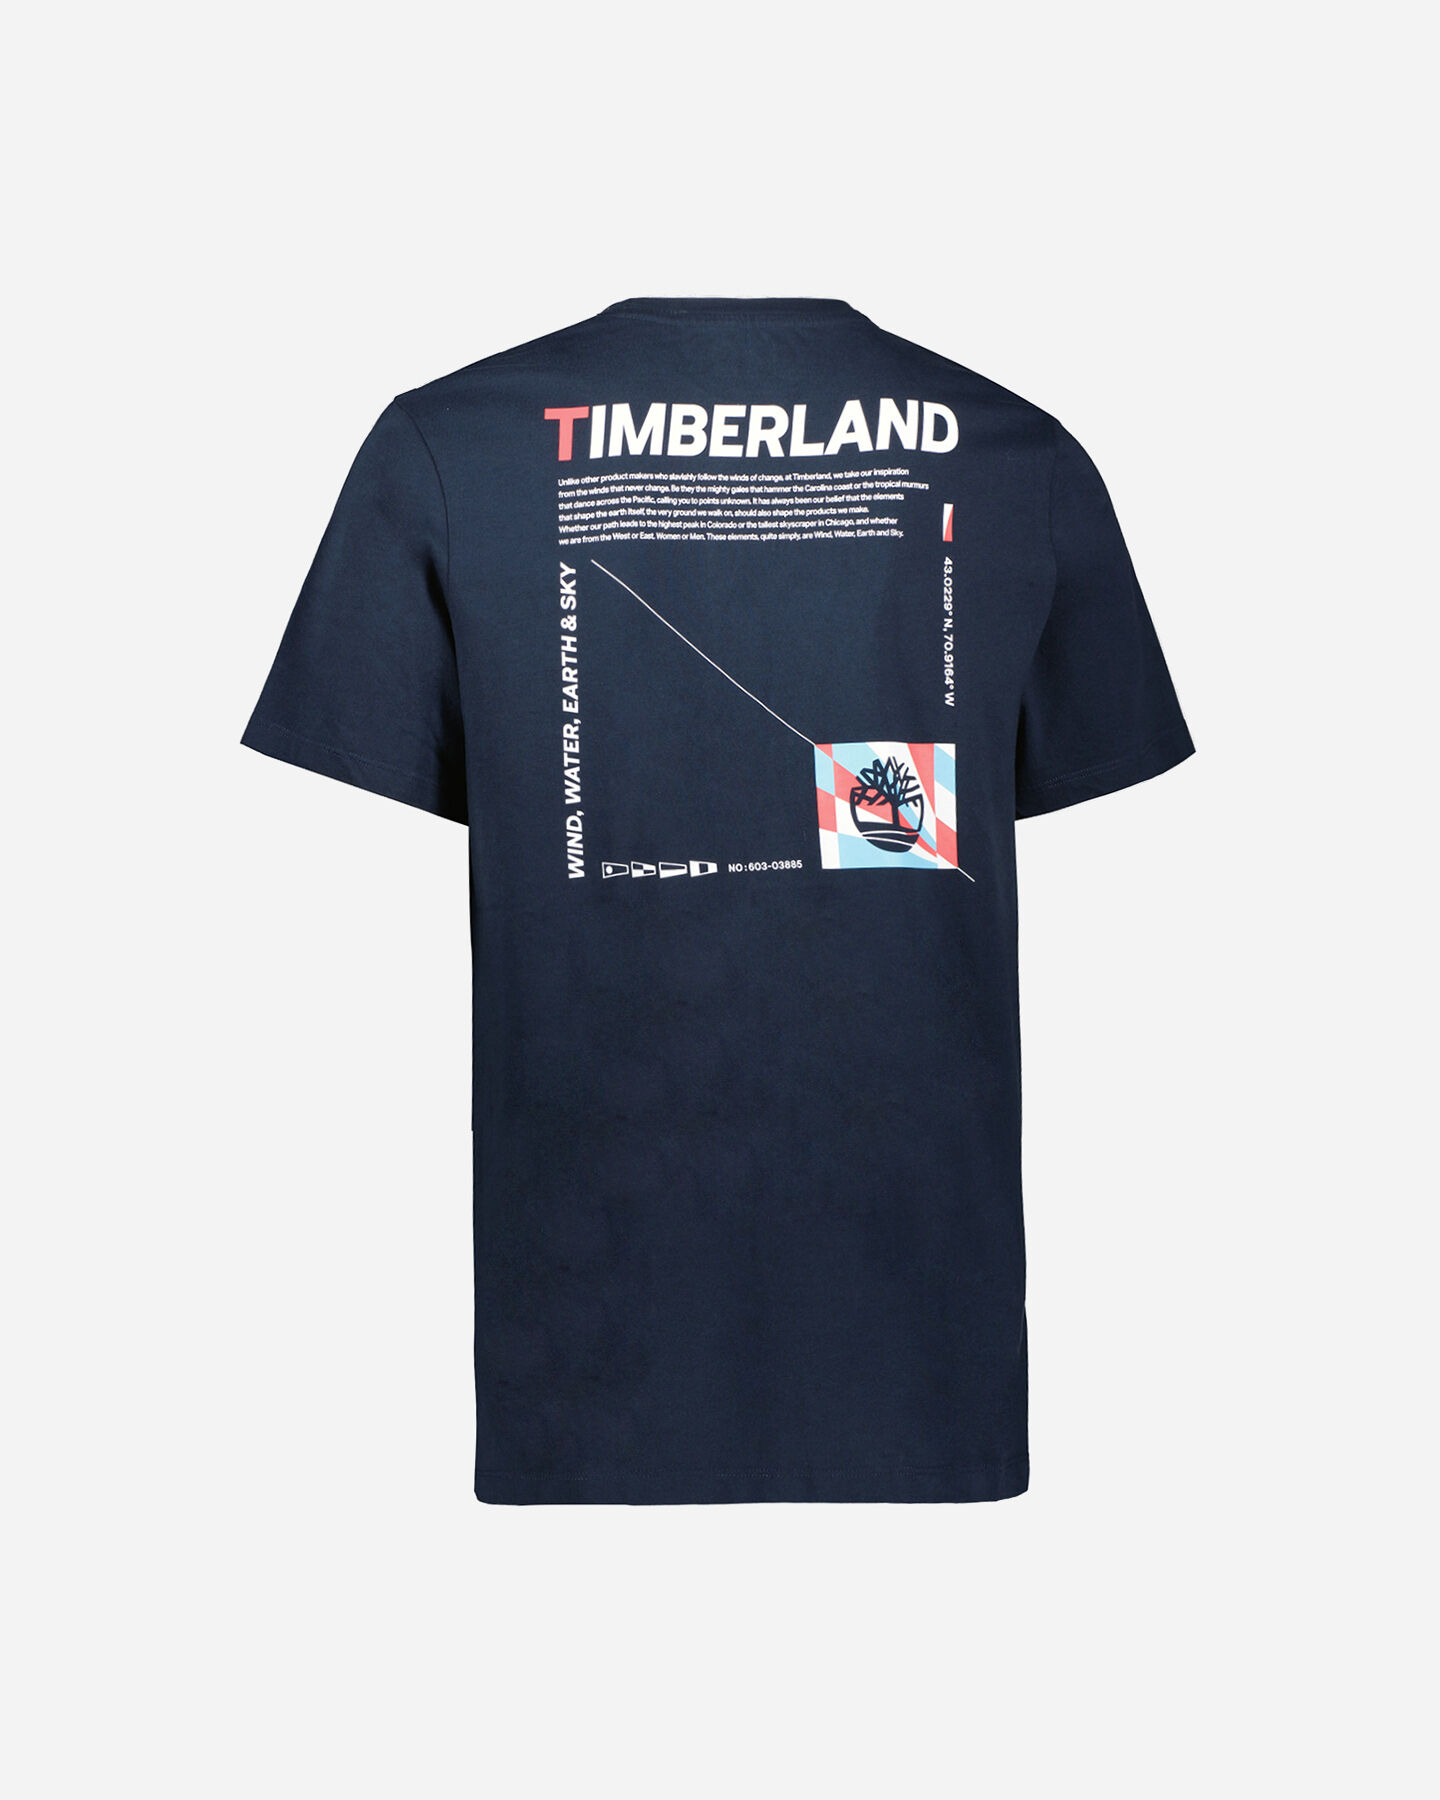  T-Shirt TIMBERLAND LOGO M S4105586|4331|S scatto 1